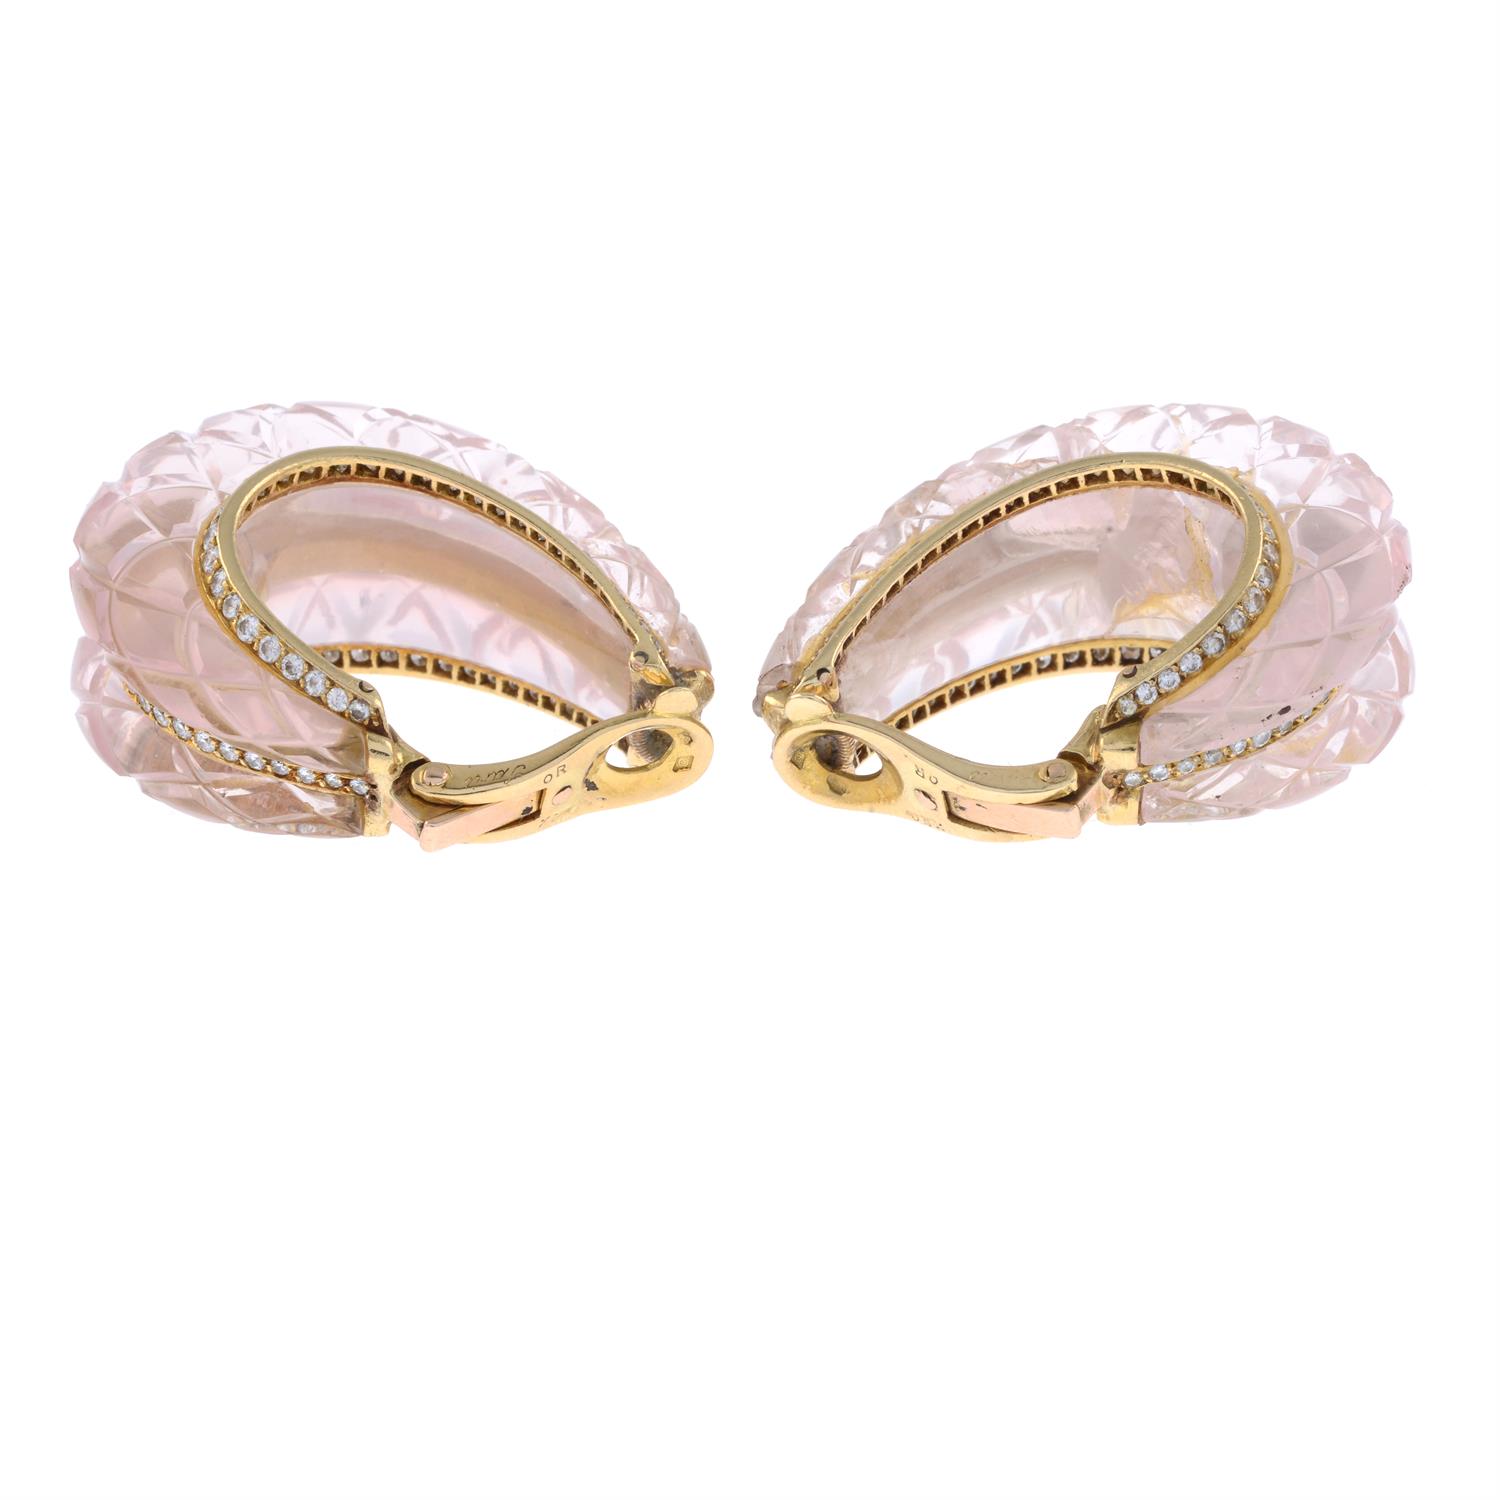 Rose quartz and diamond earrings, by Cartier - Image 3 of 3